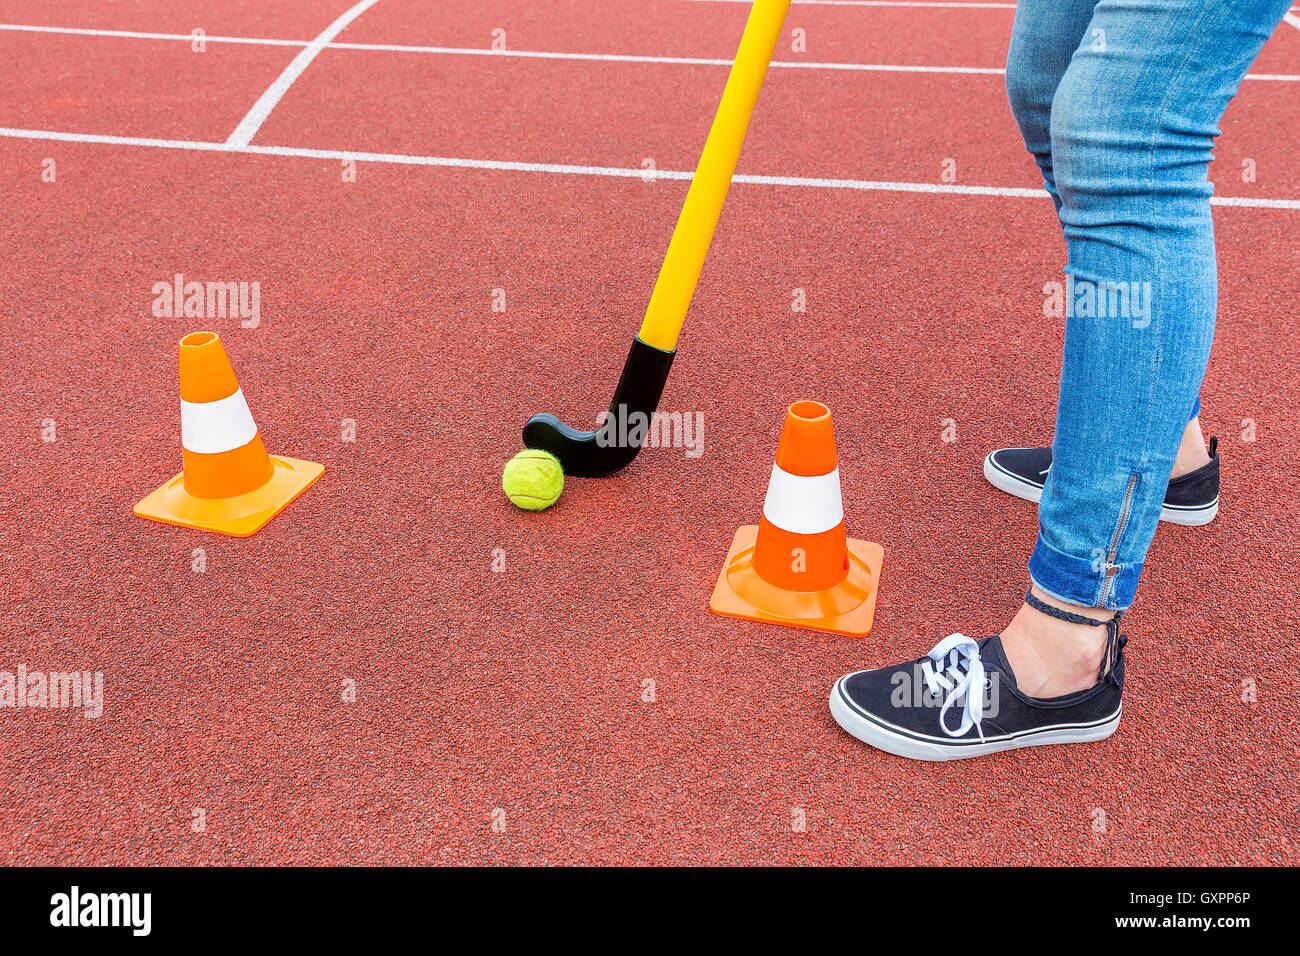 Legs of teenage girl as hockey player with stick ball and orange pawns Stock Photo